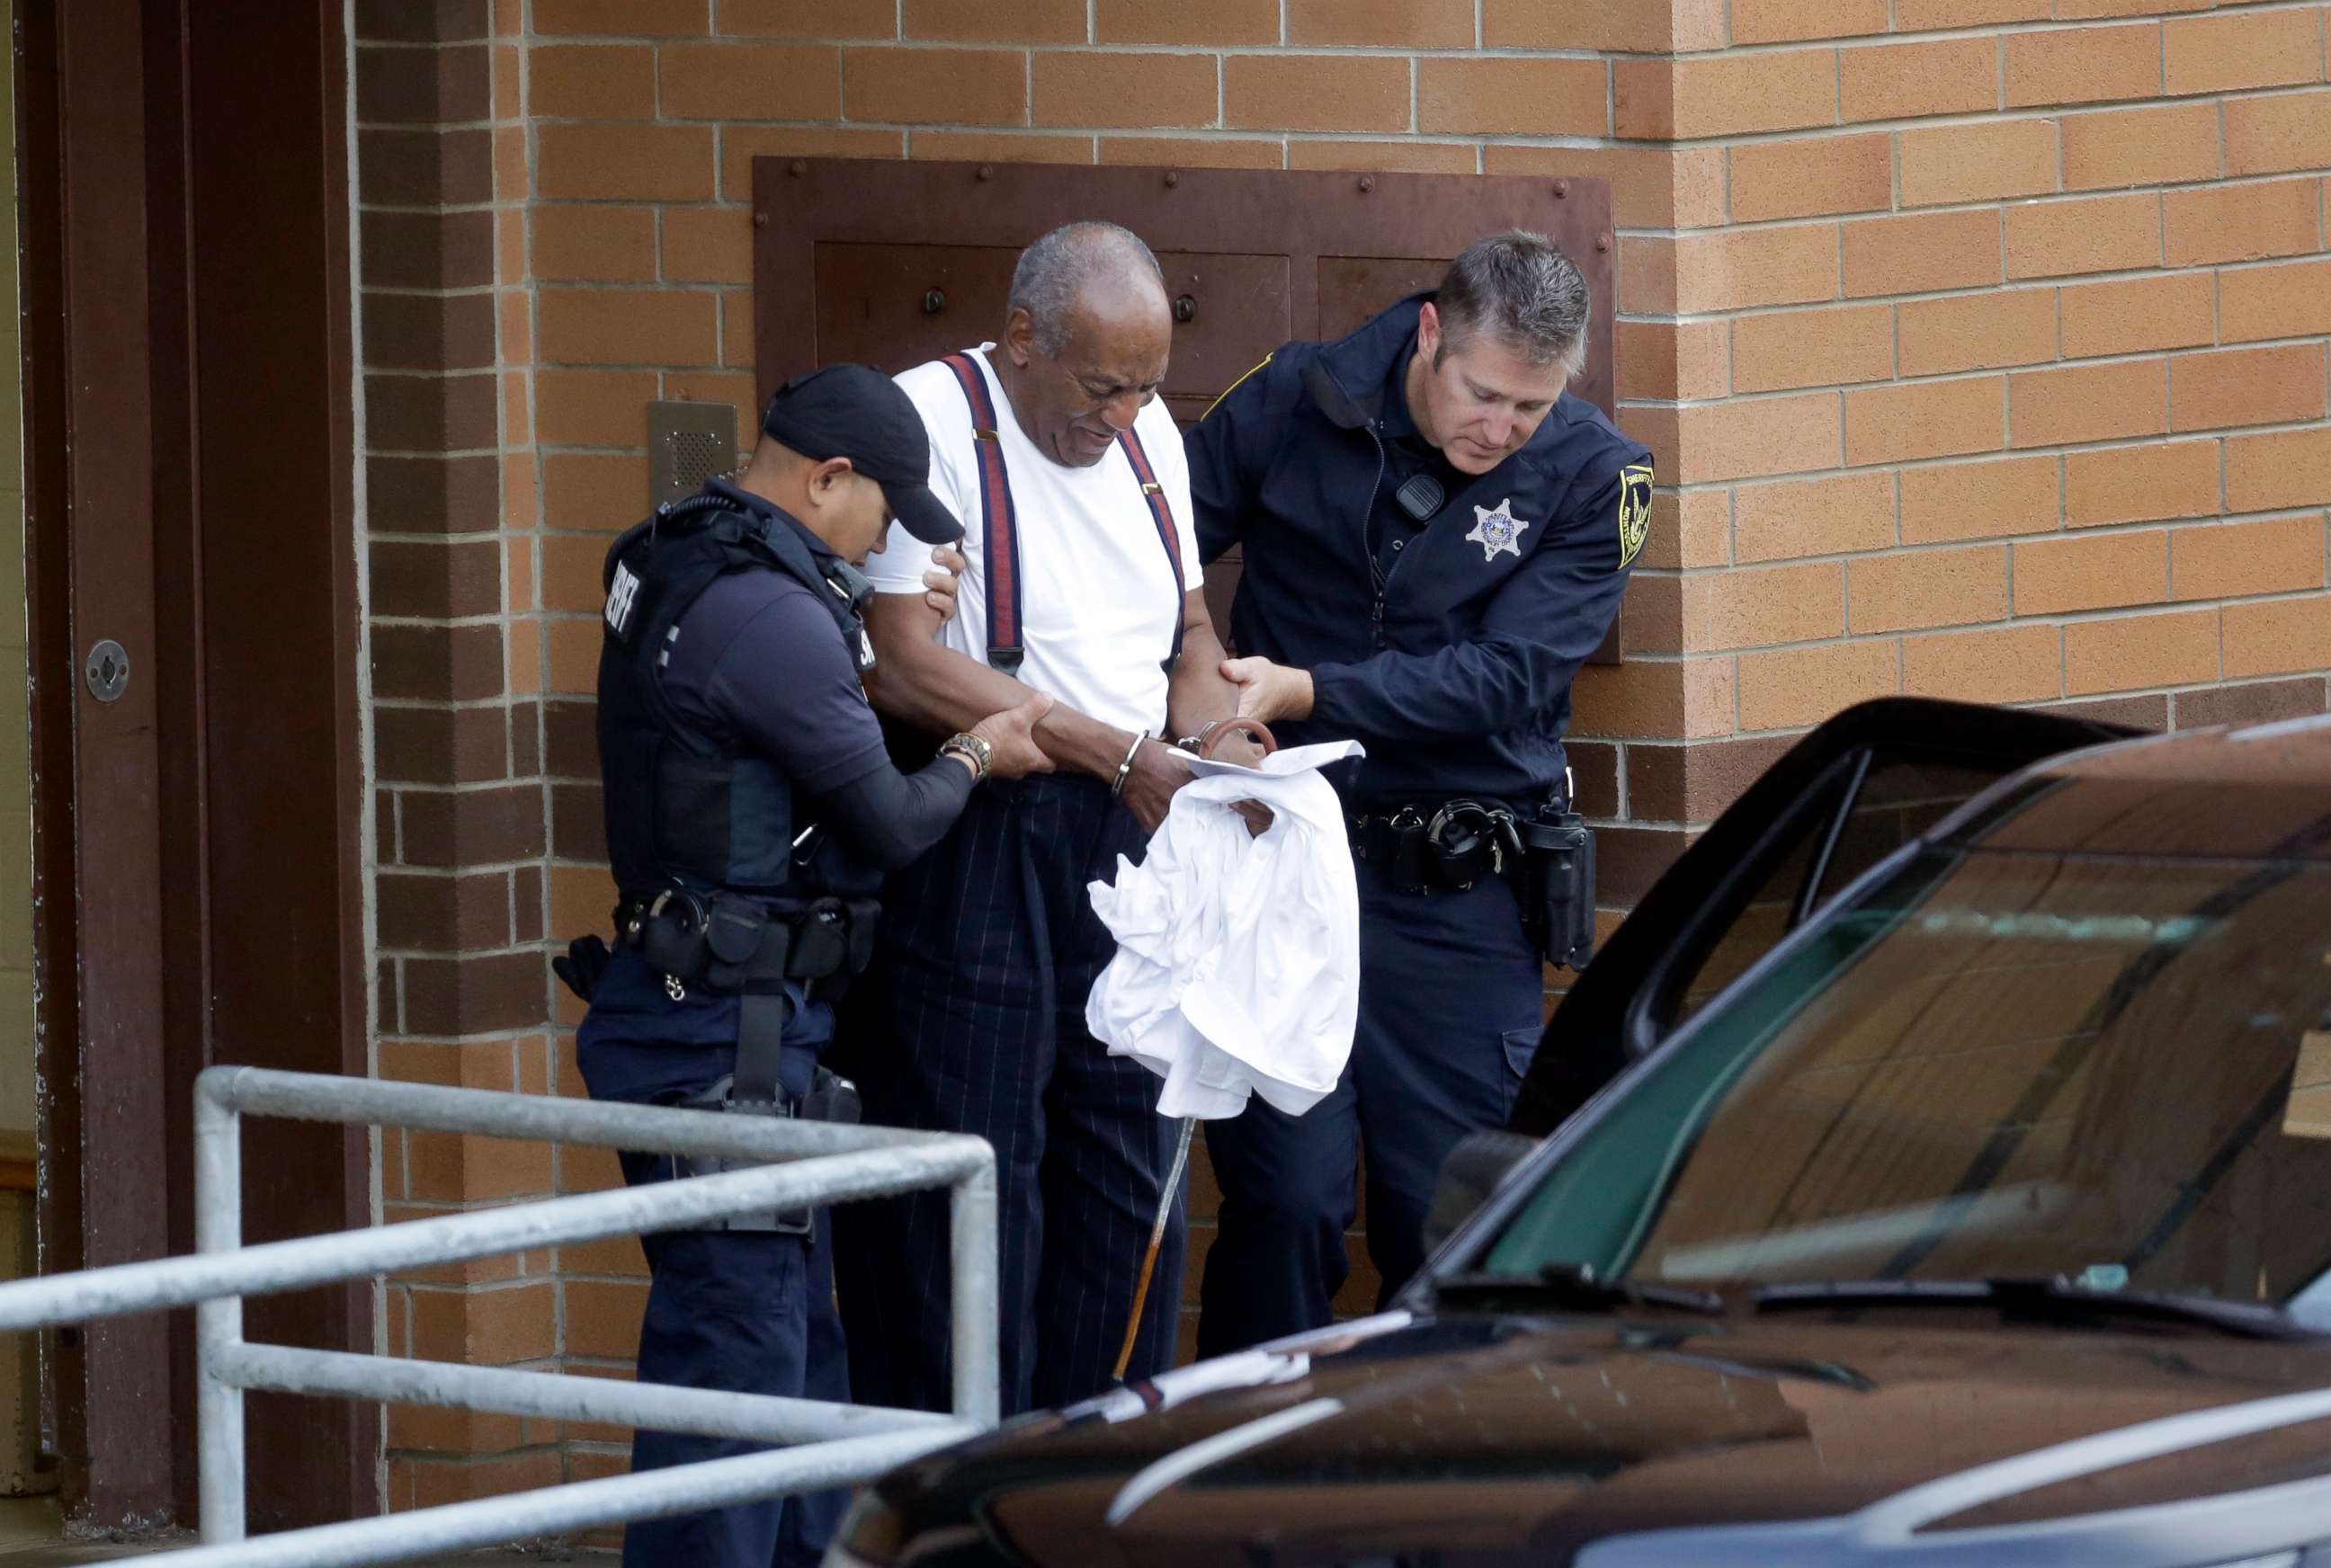 PHOTO: Bill Cosby is escorted out of the Montgomery County Correctional Facility Tuesday Sept. 25, 2018 in Eagleville, Pa., following his sentencing for sexual assault.